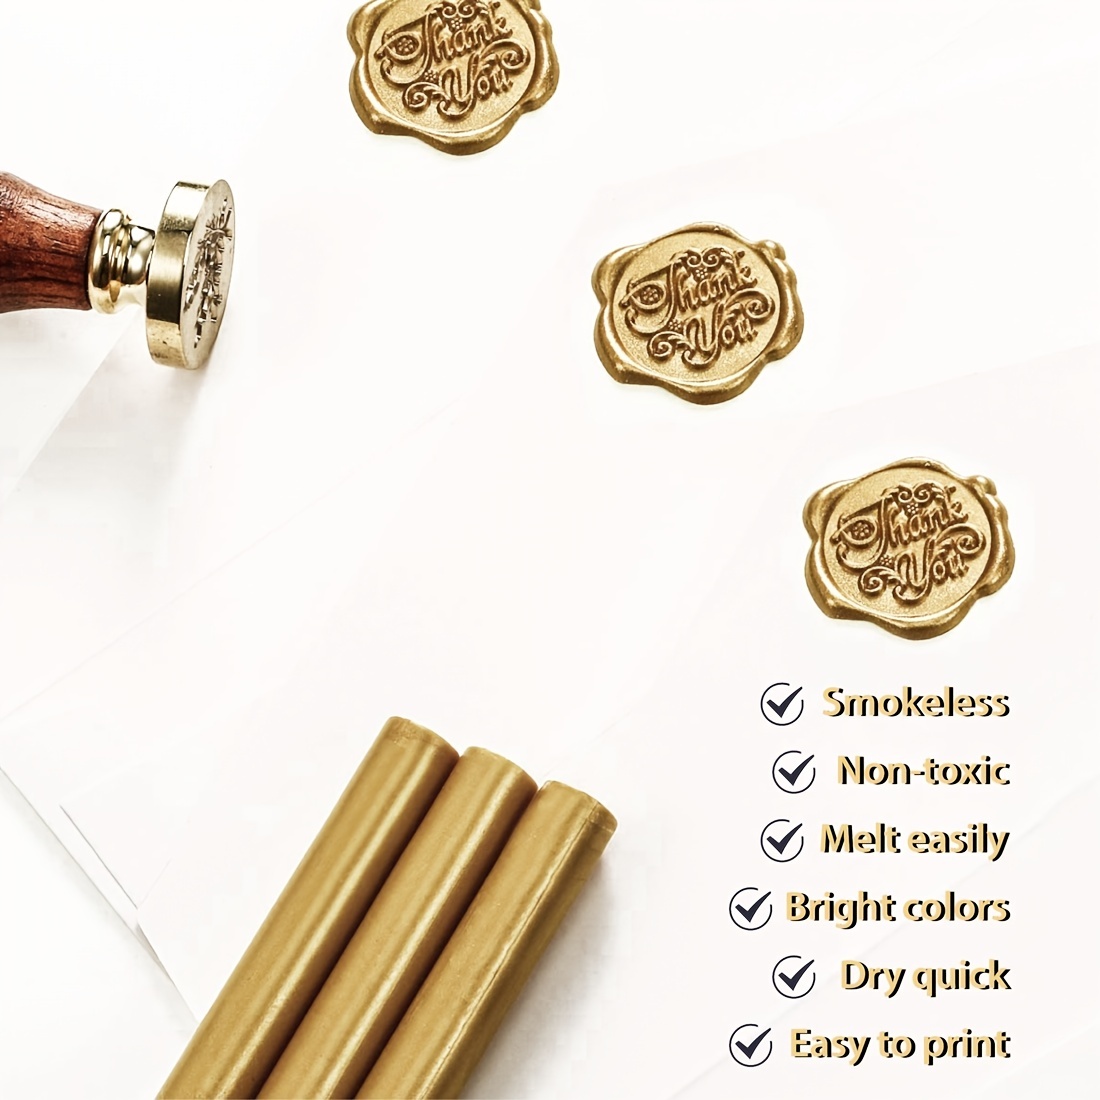 Sealing Wax Stick Metallic Antique Gold Glue Gun Wax Seal for Wedding  Invitations, Cards Envelopes, Snail Mails, Gift Ideas, Pack of 8 